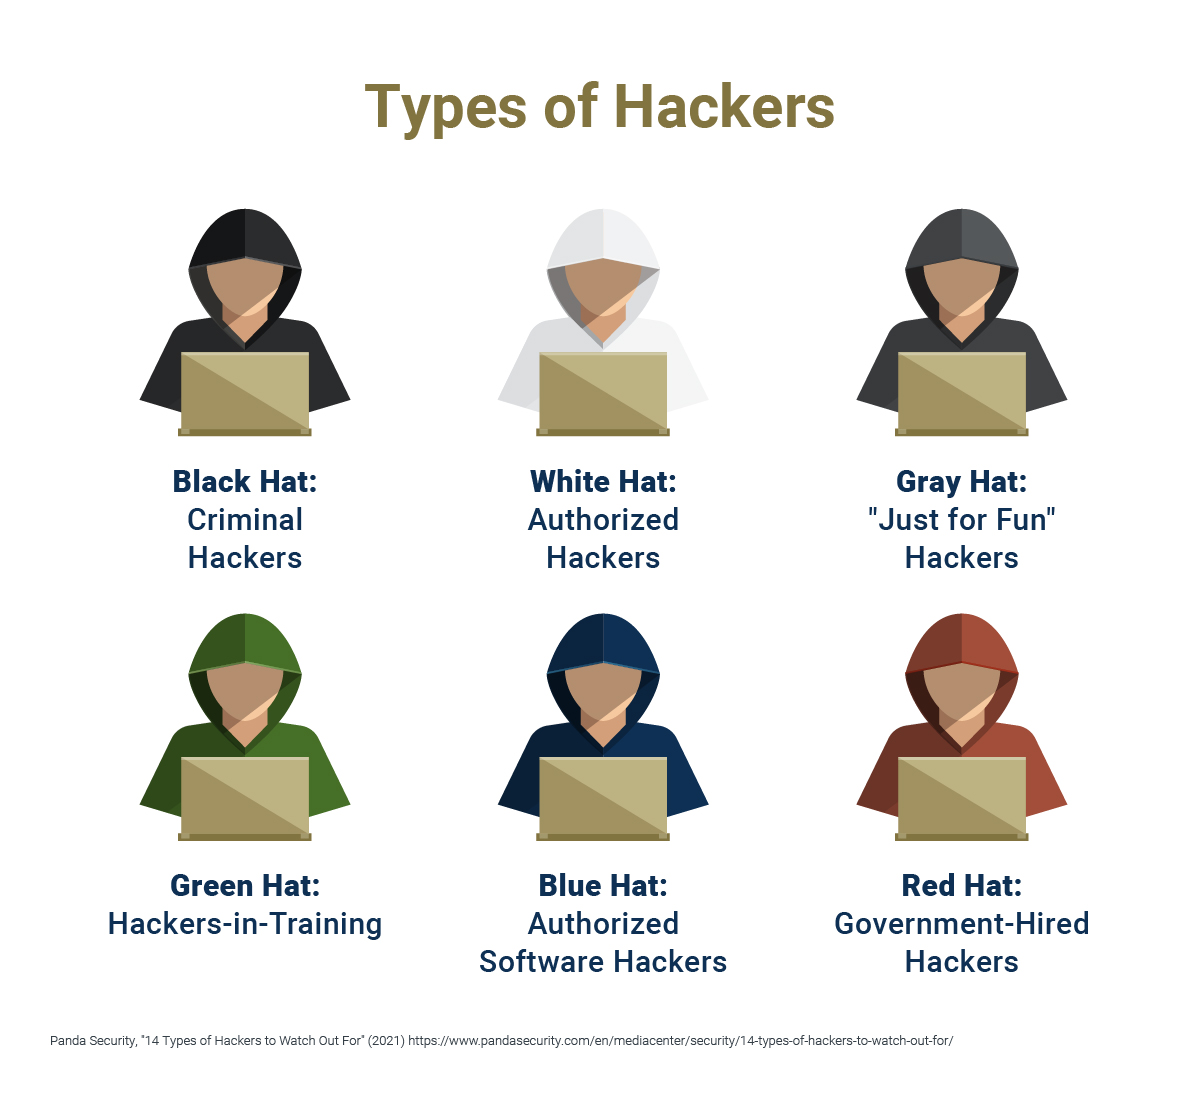 An image that highlights the different types of hackers by the color used to describe them.